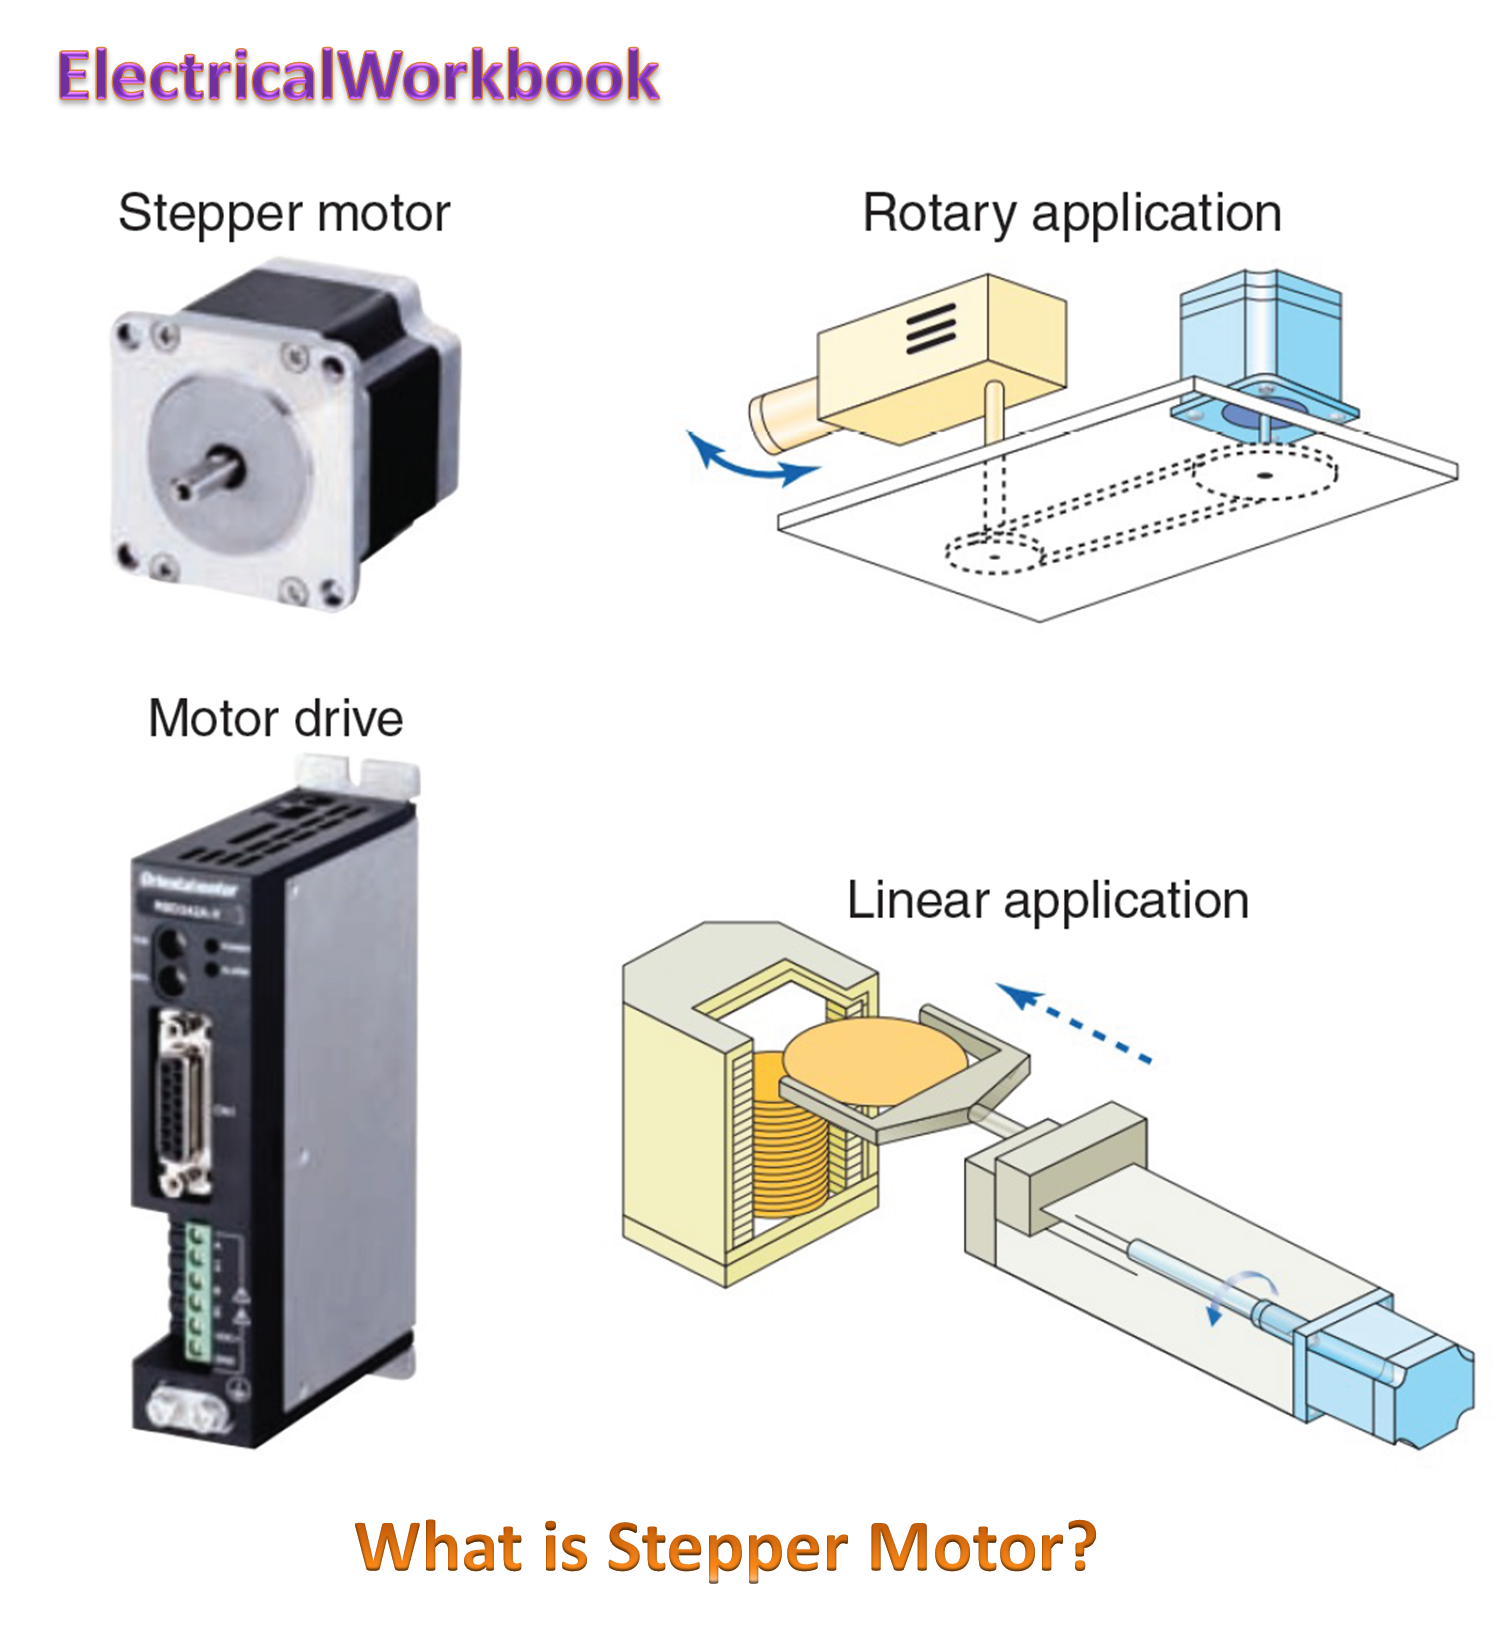 What is Stepper Motor